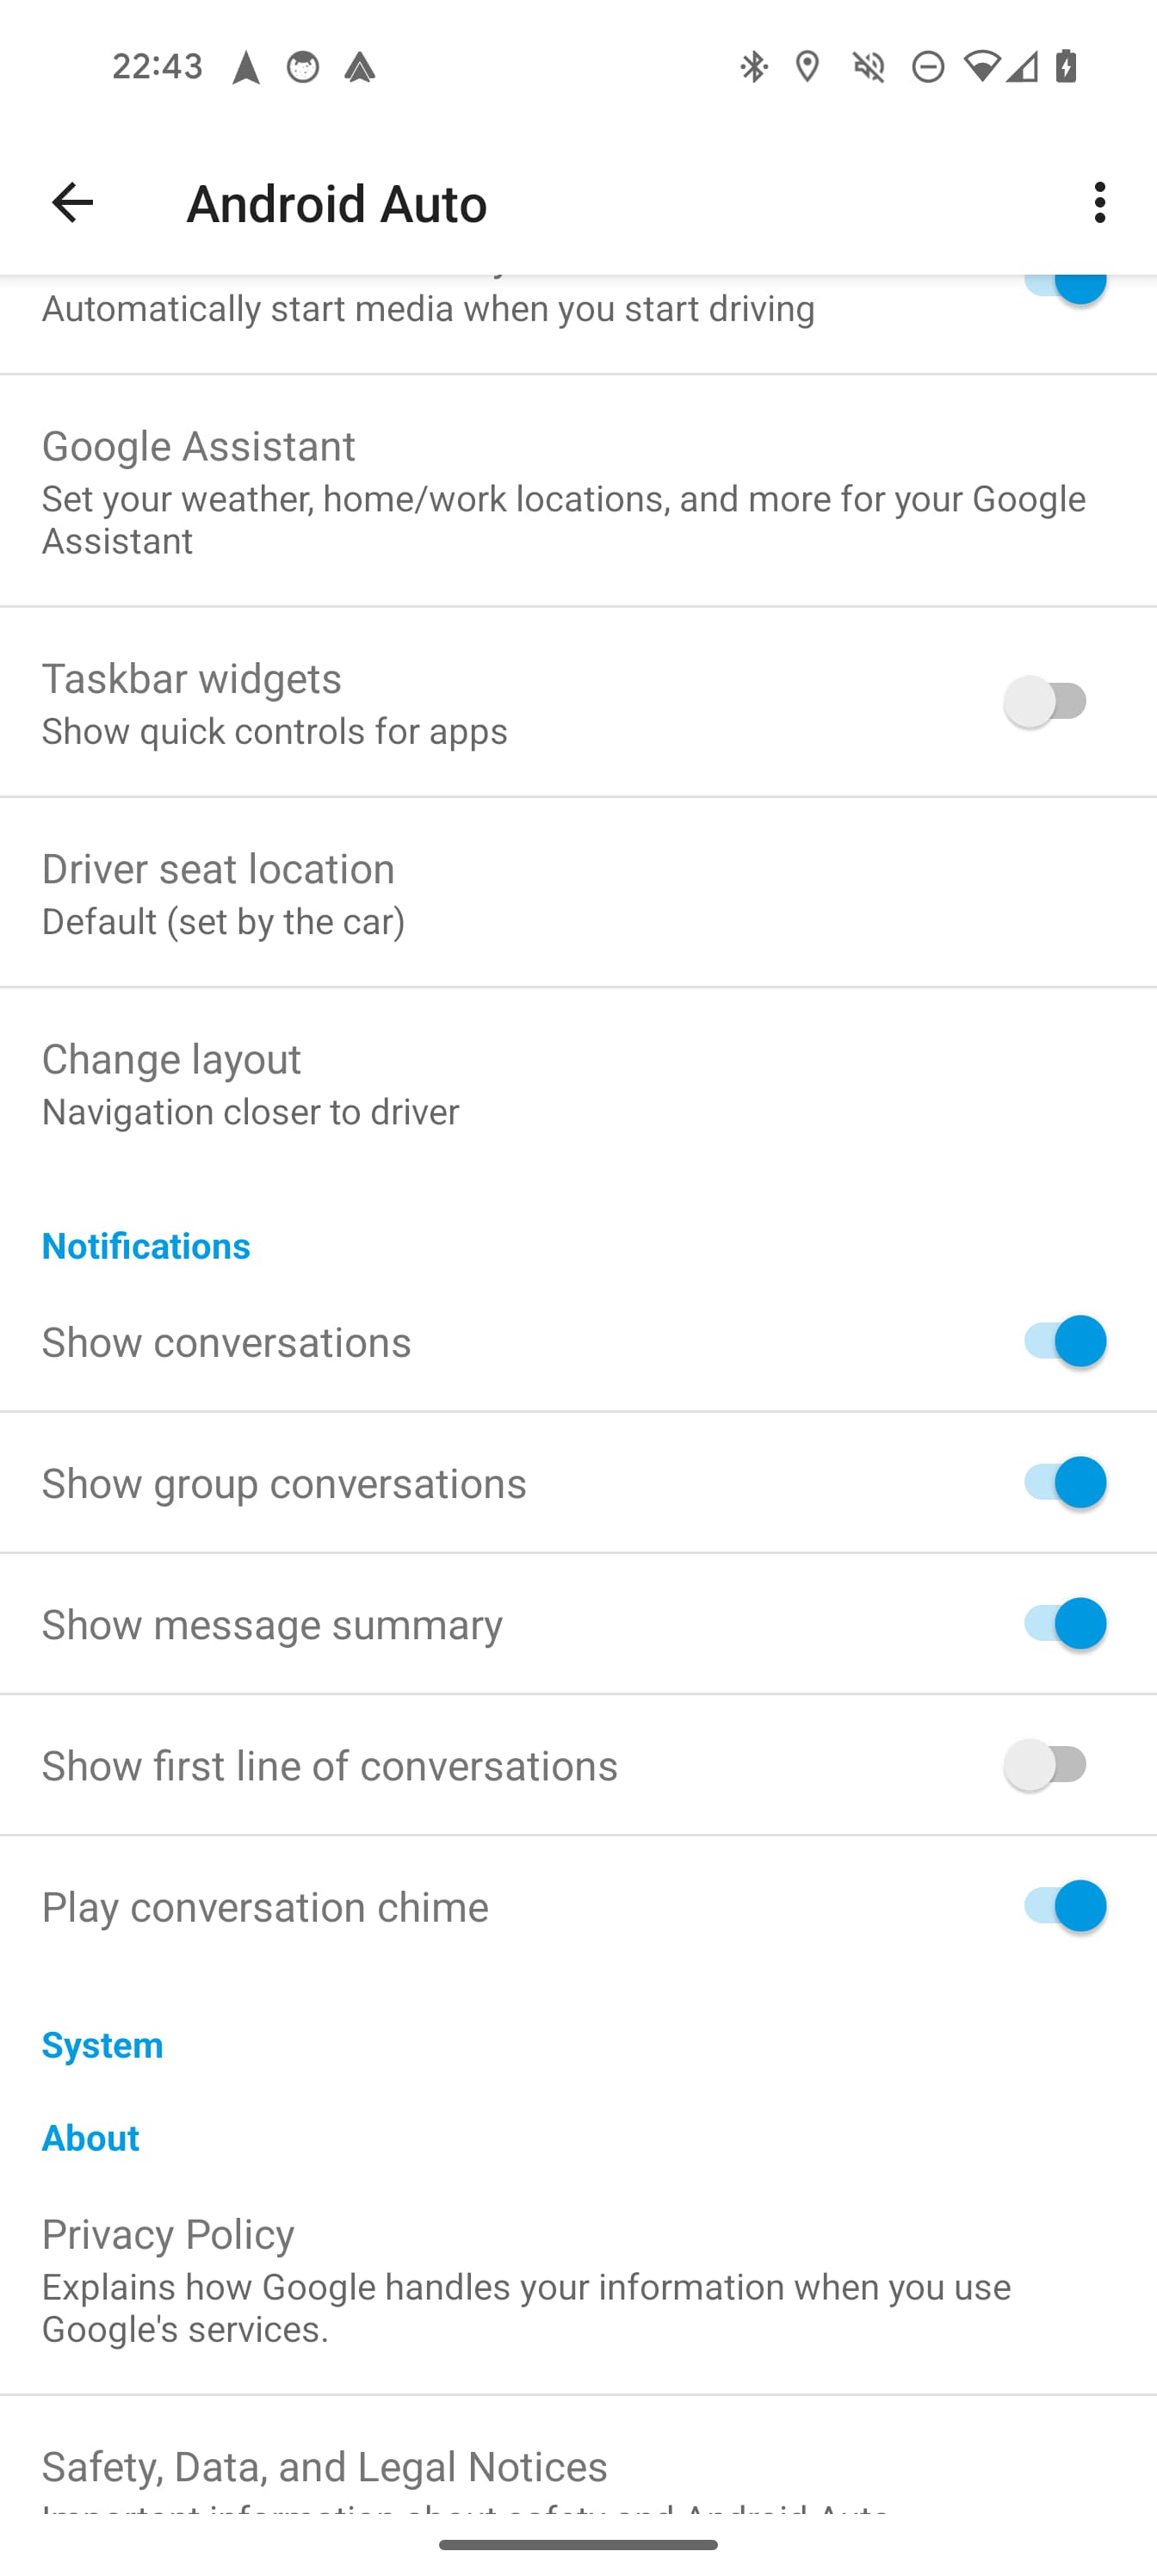 Android Auto summarize messages